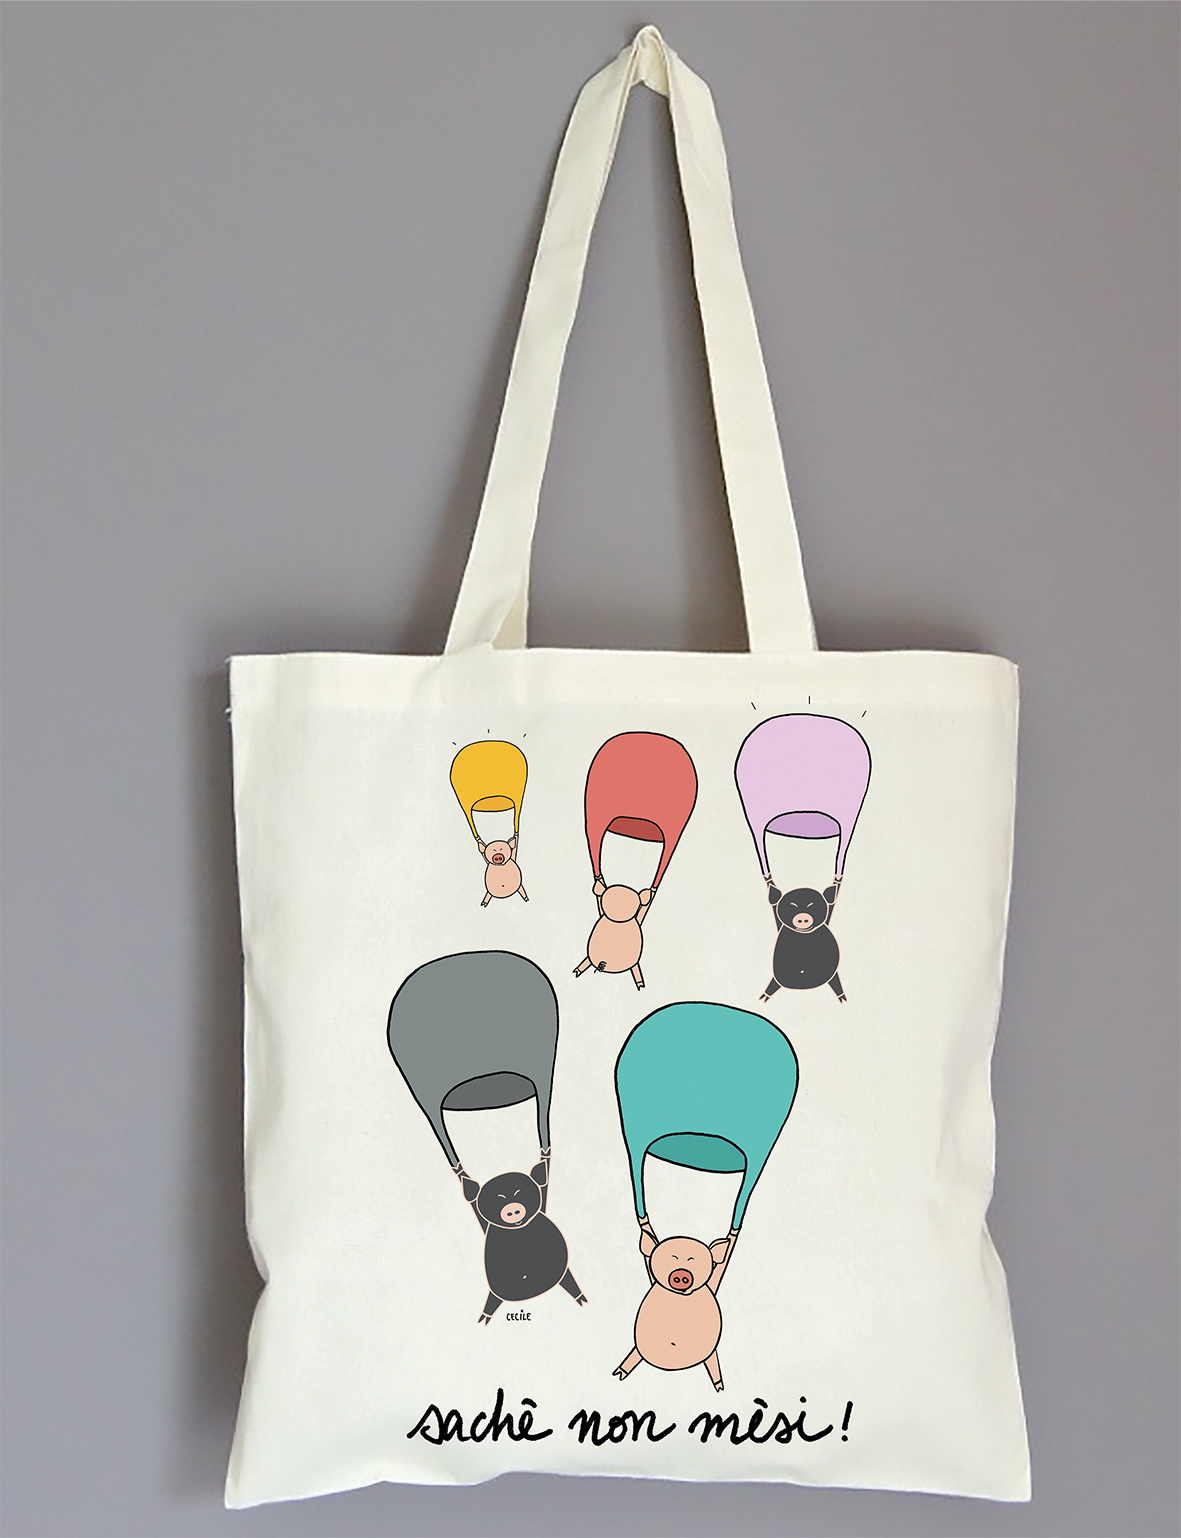 Tote bag message